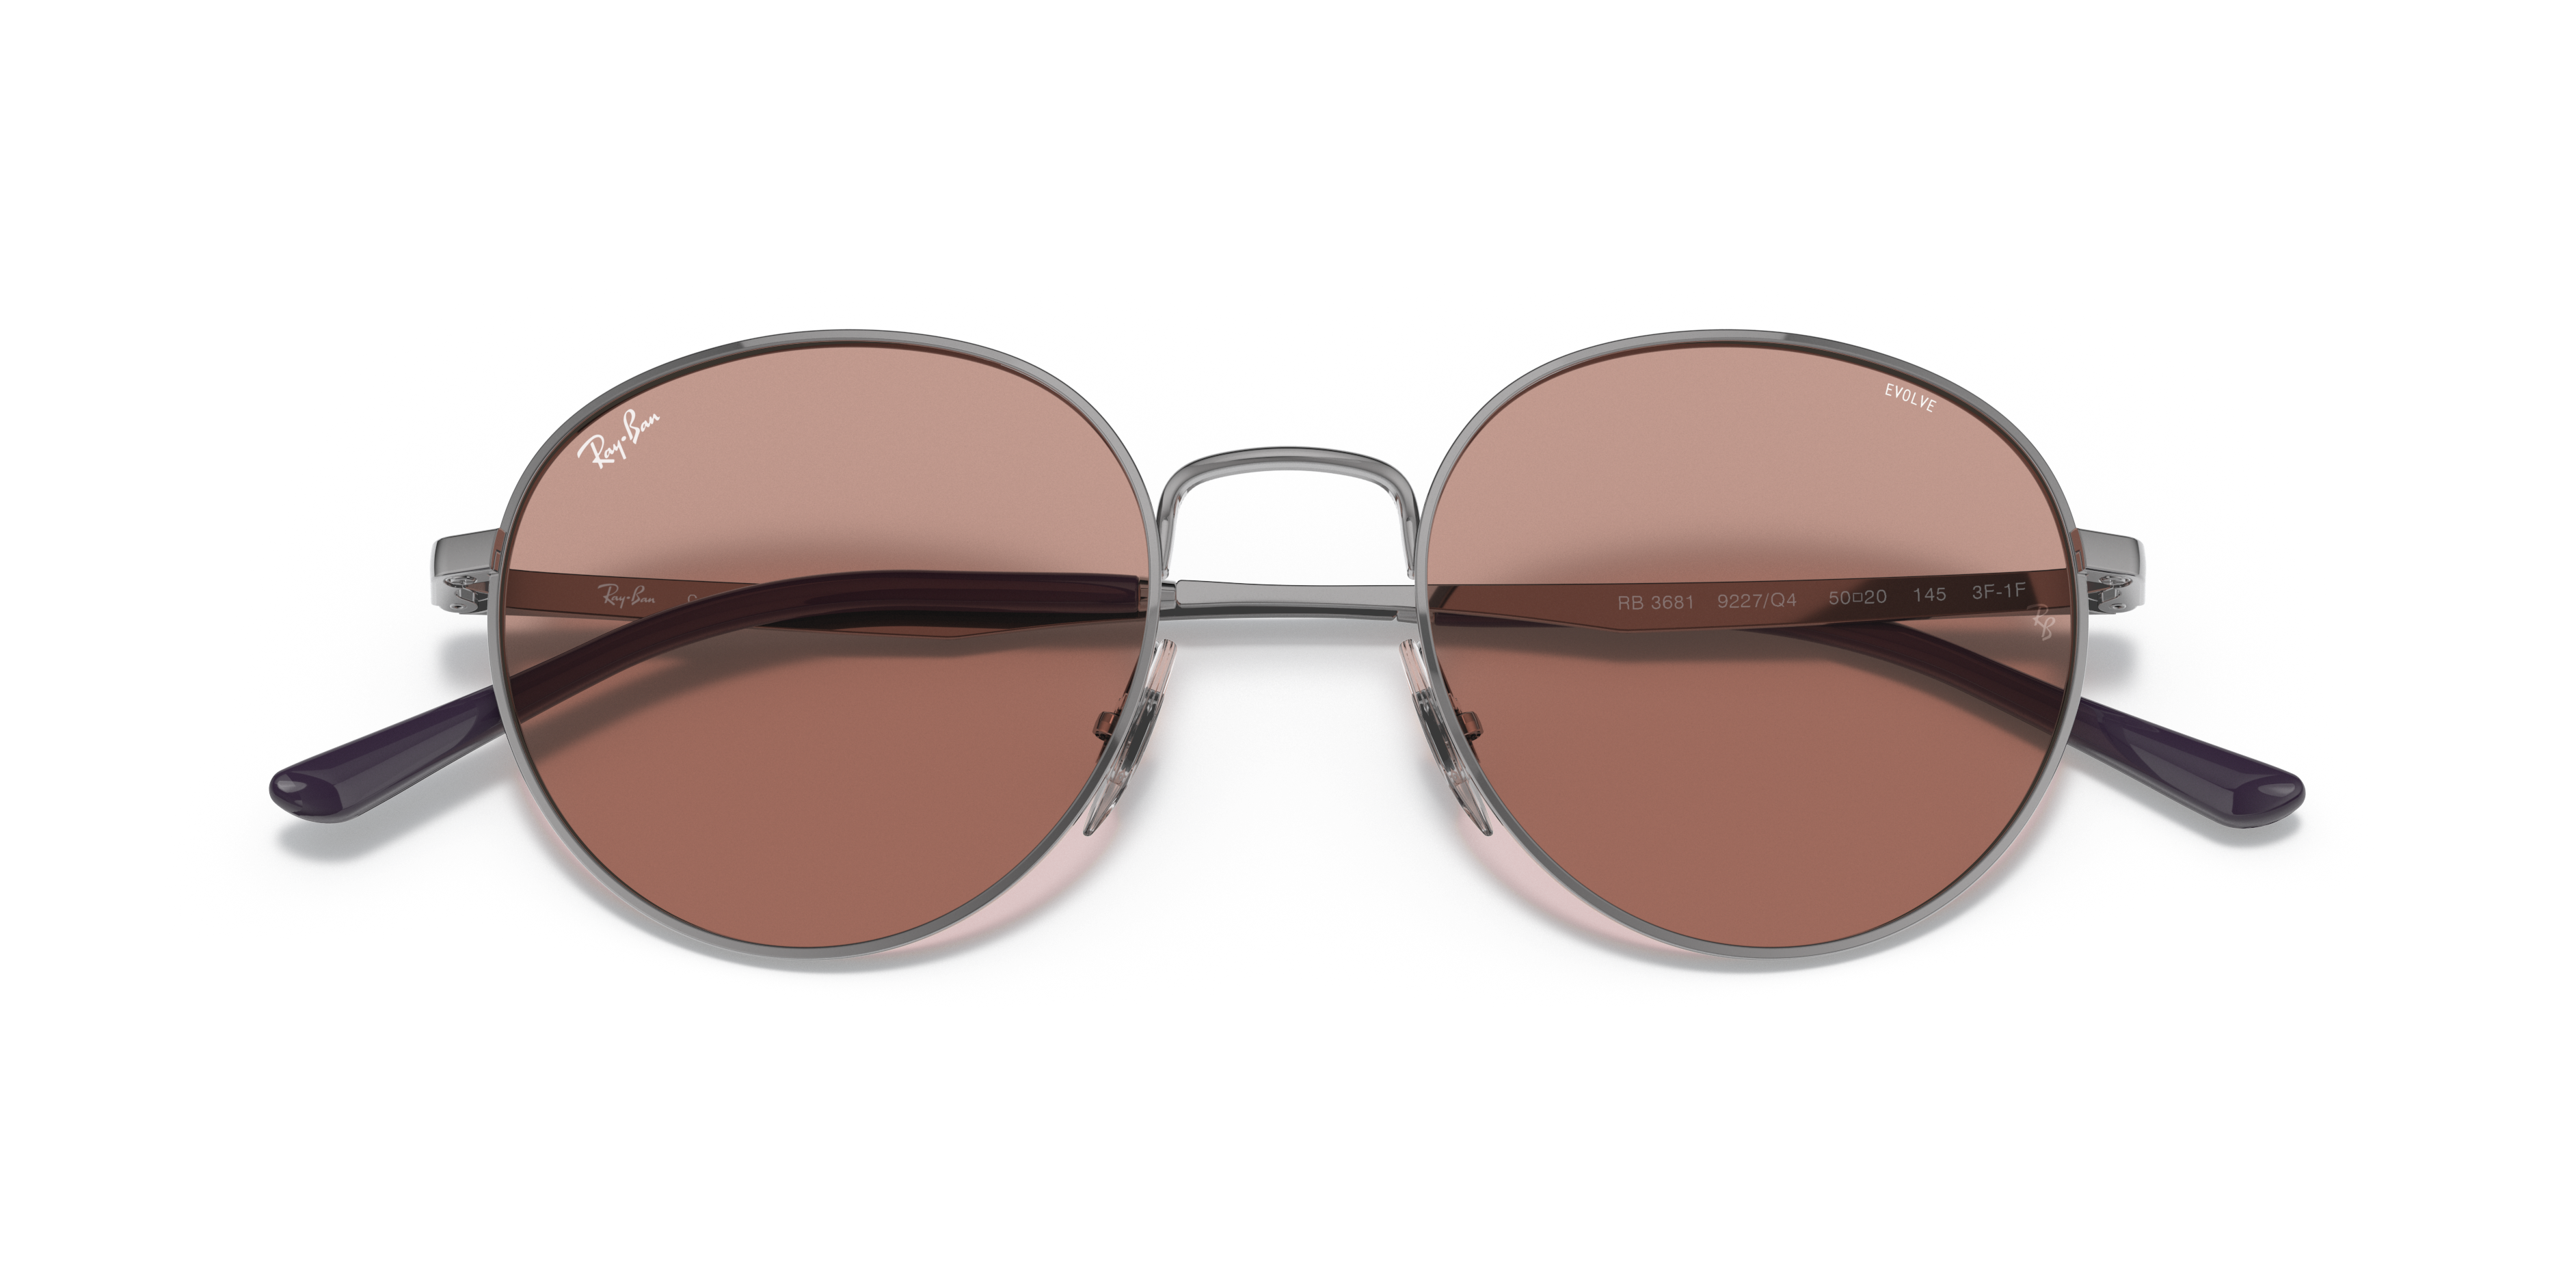 Rb3681 Evolve Sunglasses in Gunmetal and Brown Photochromic | Ray-Ban®